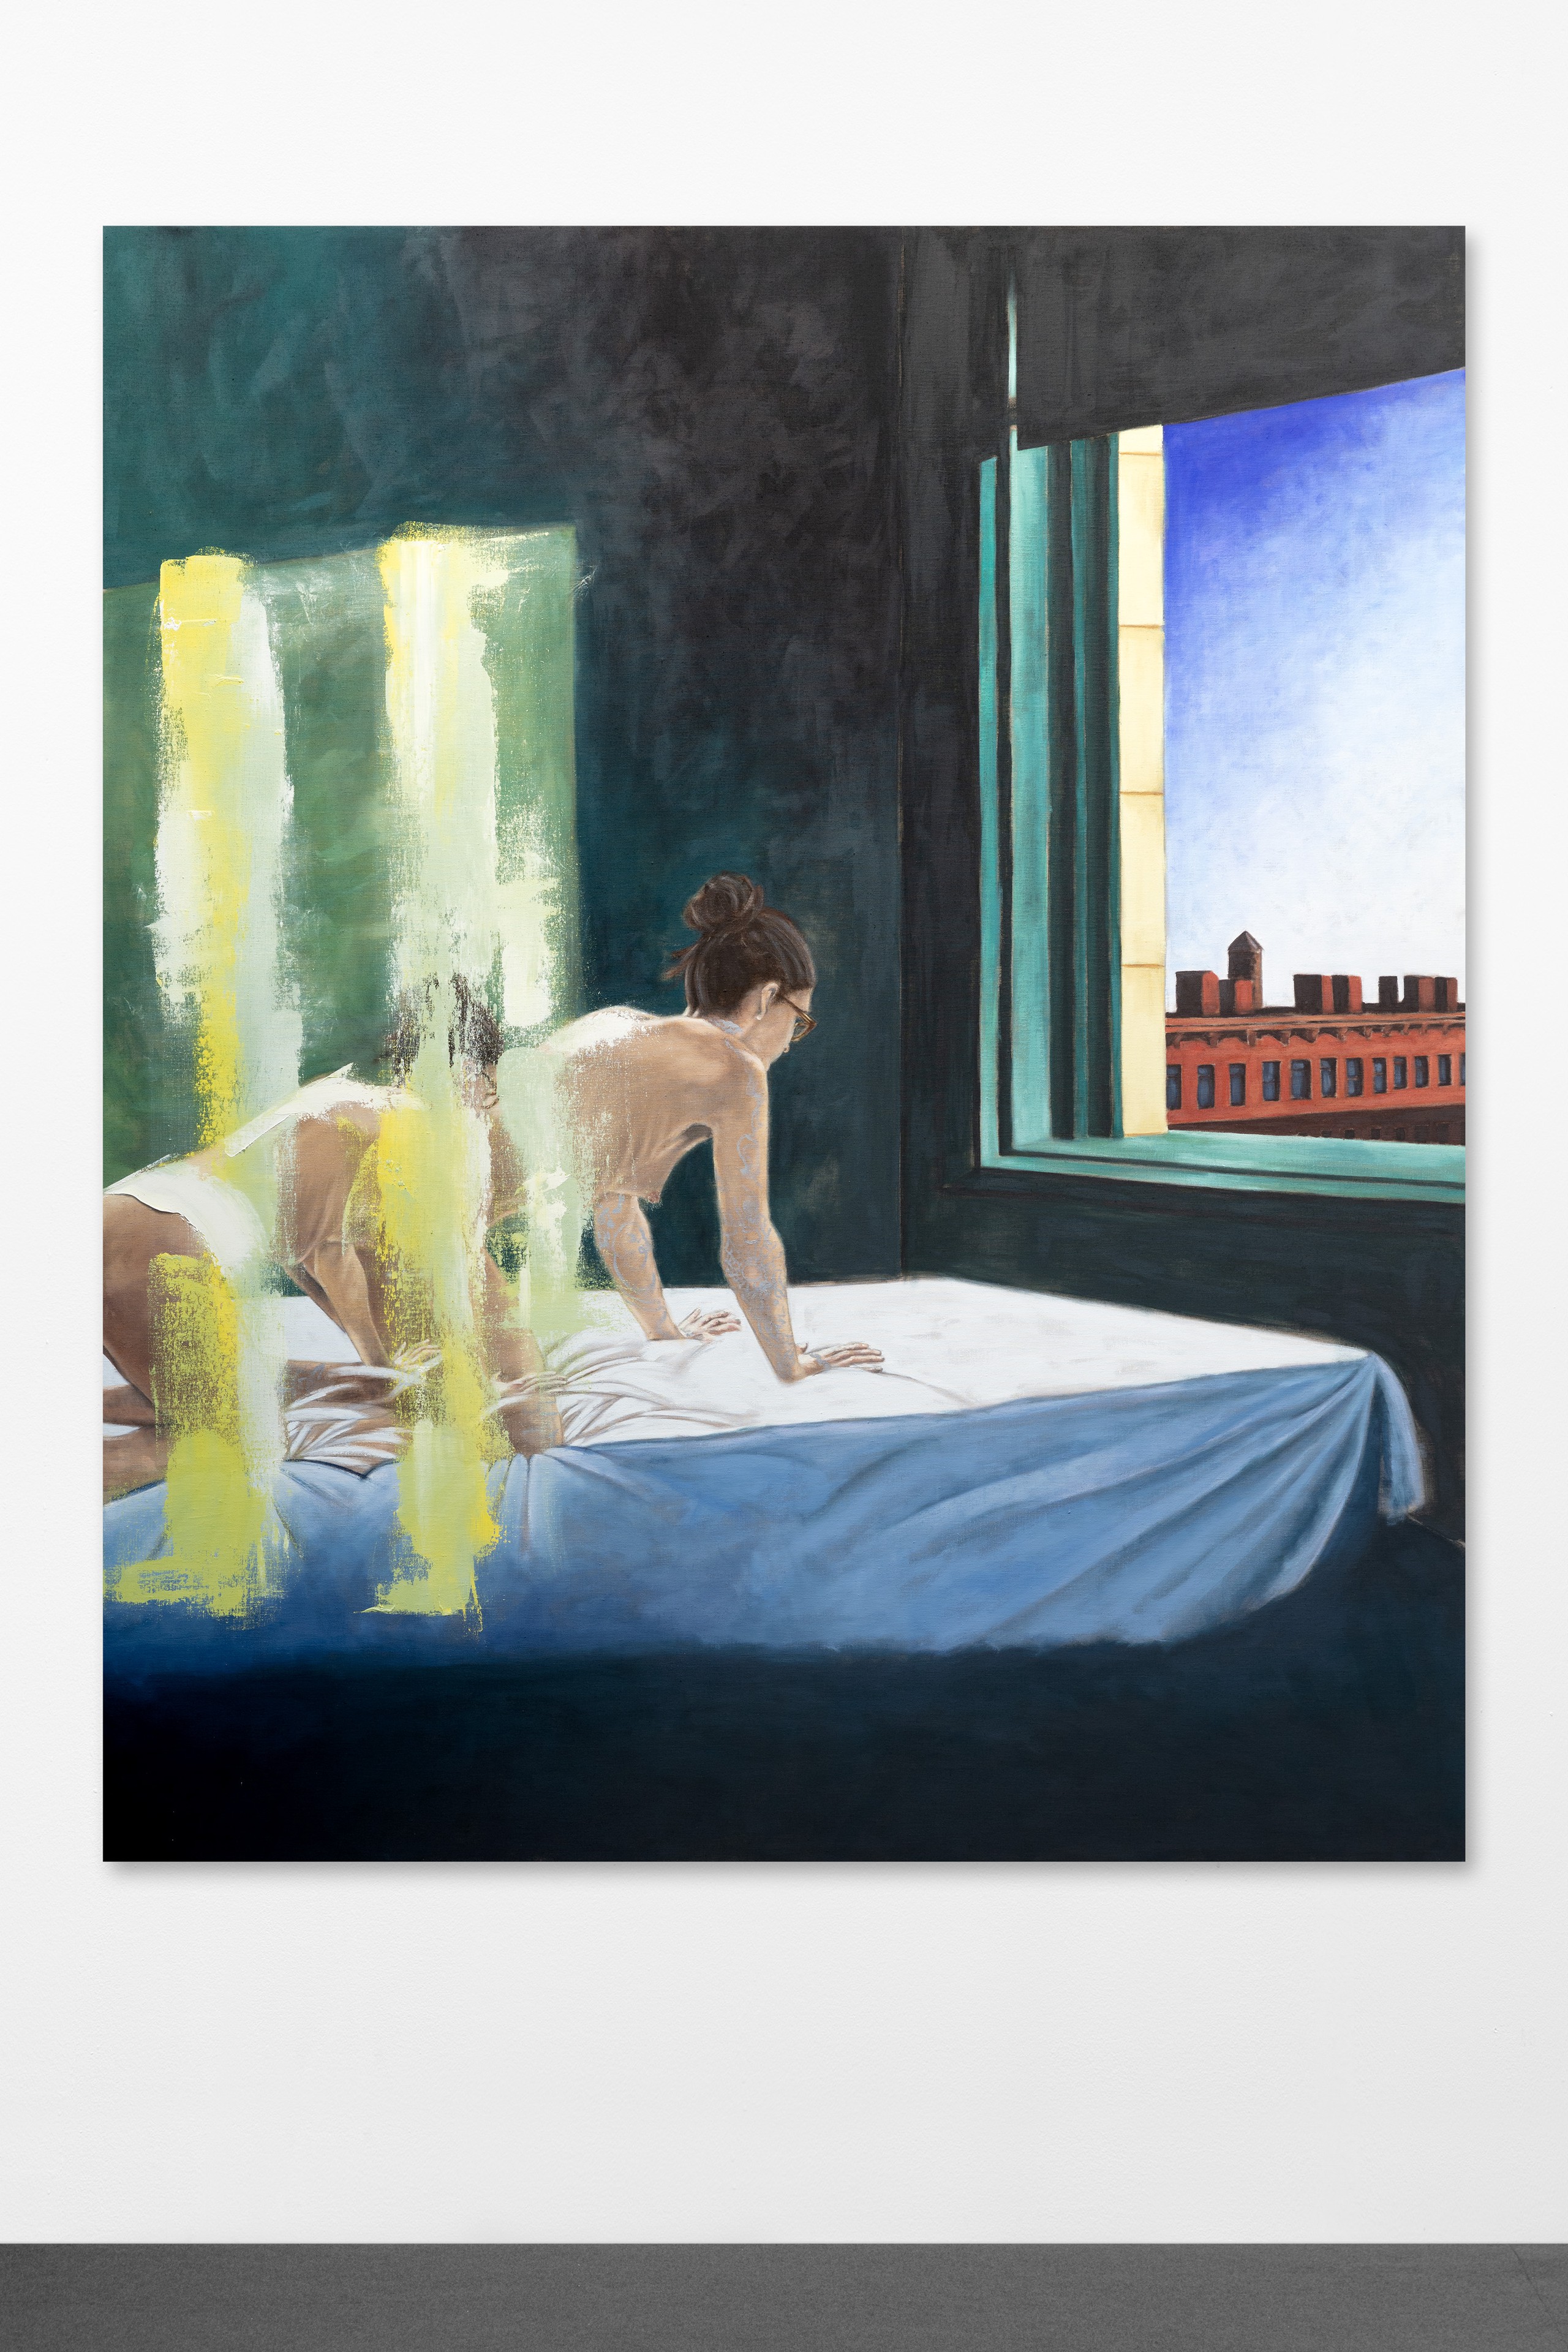 Jeanette Mundt, right and not accurate, 2022, oil on linen, 182.9 x 152.4 x 3 cm, 72 x 60 x 1 in